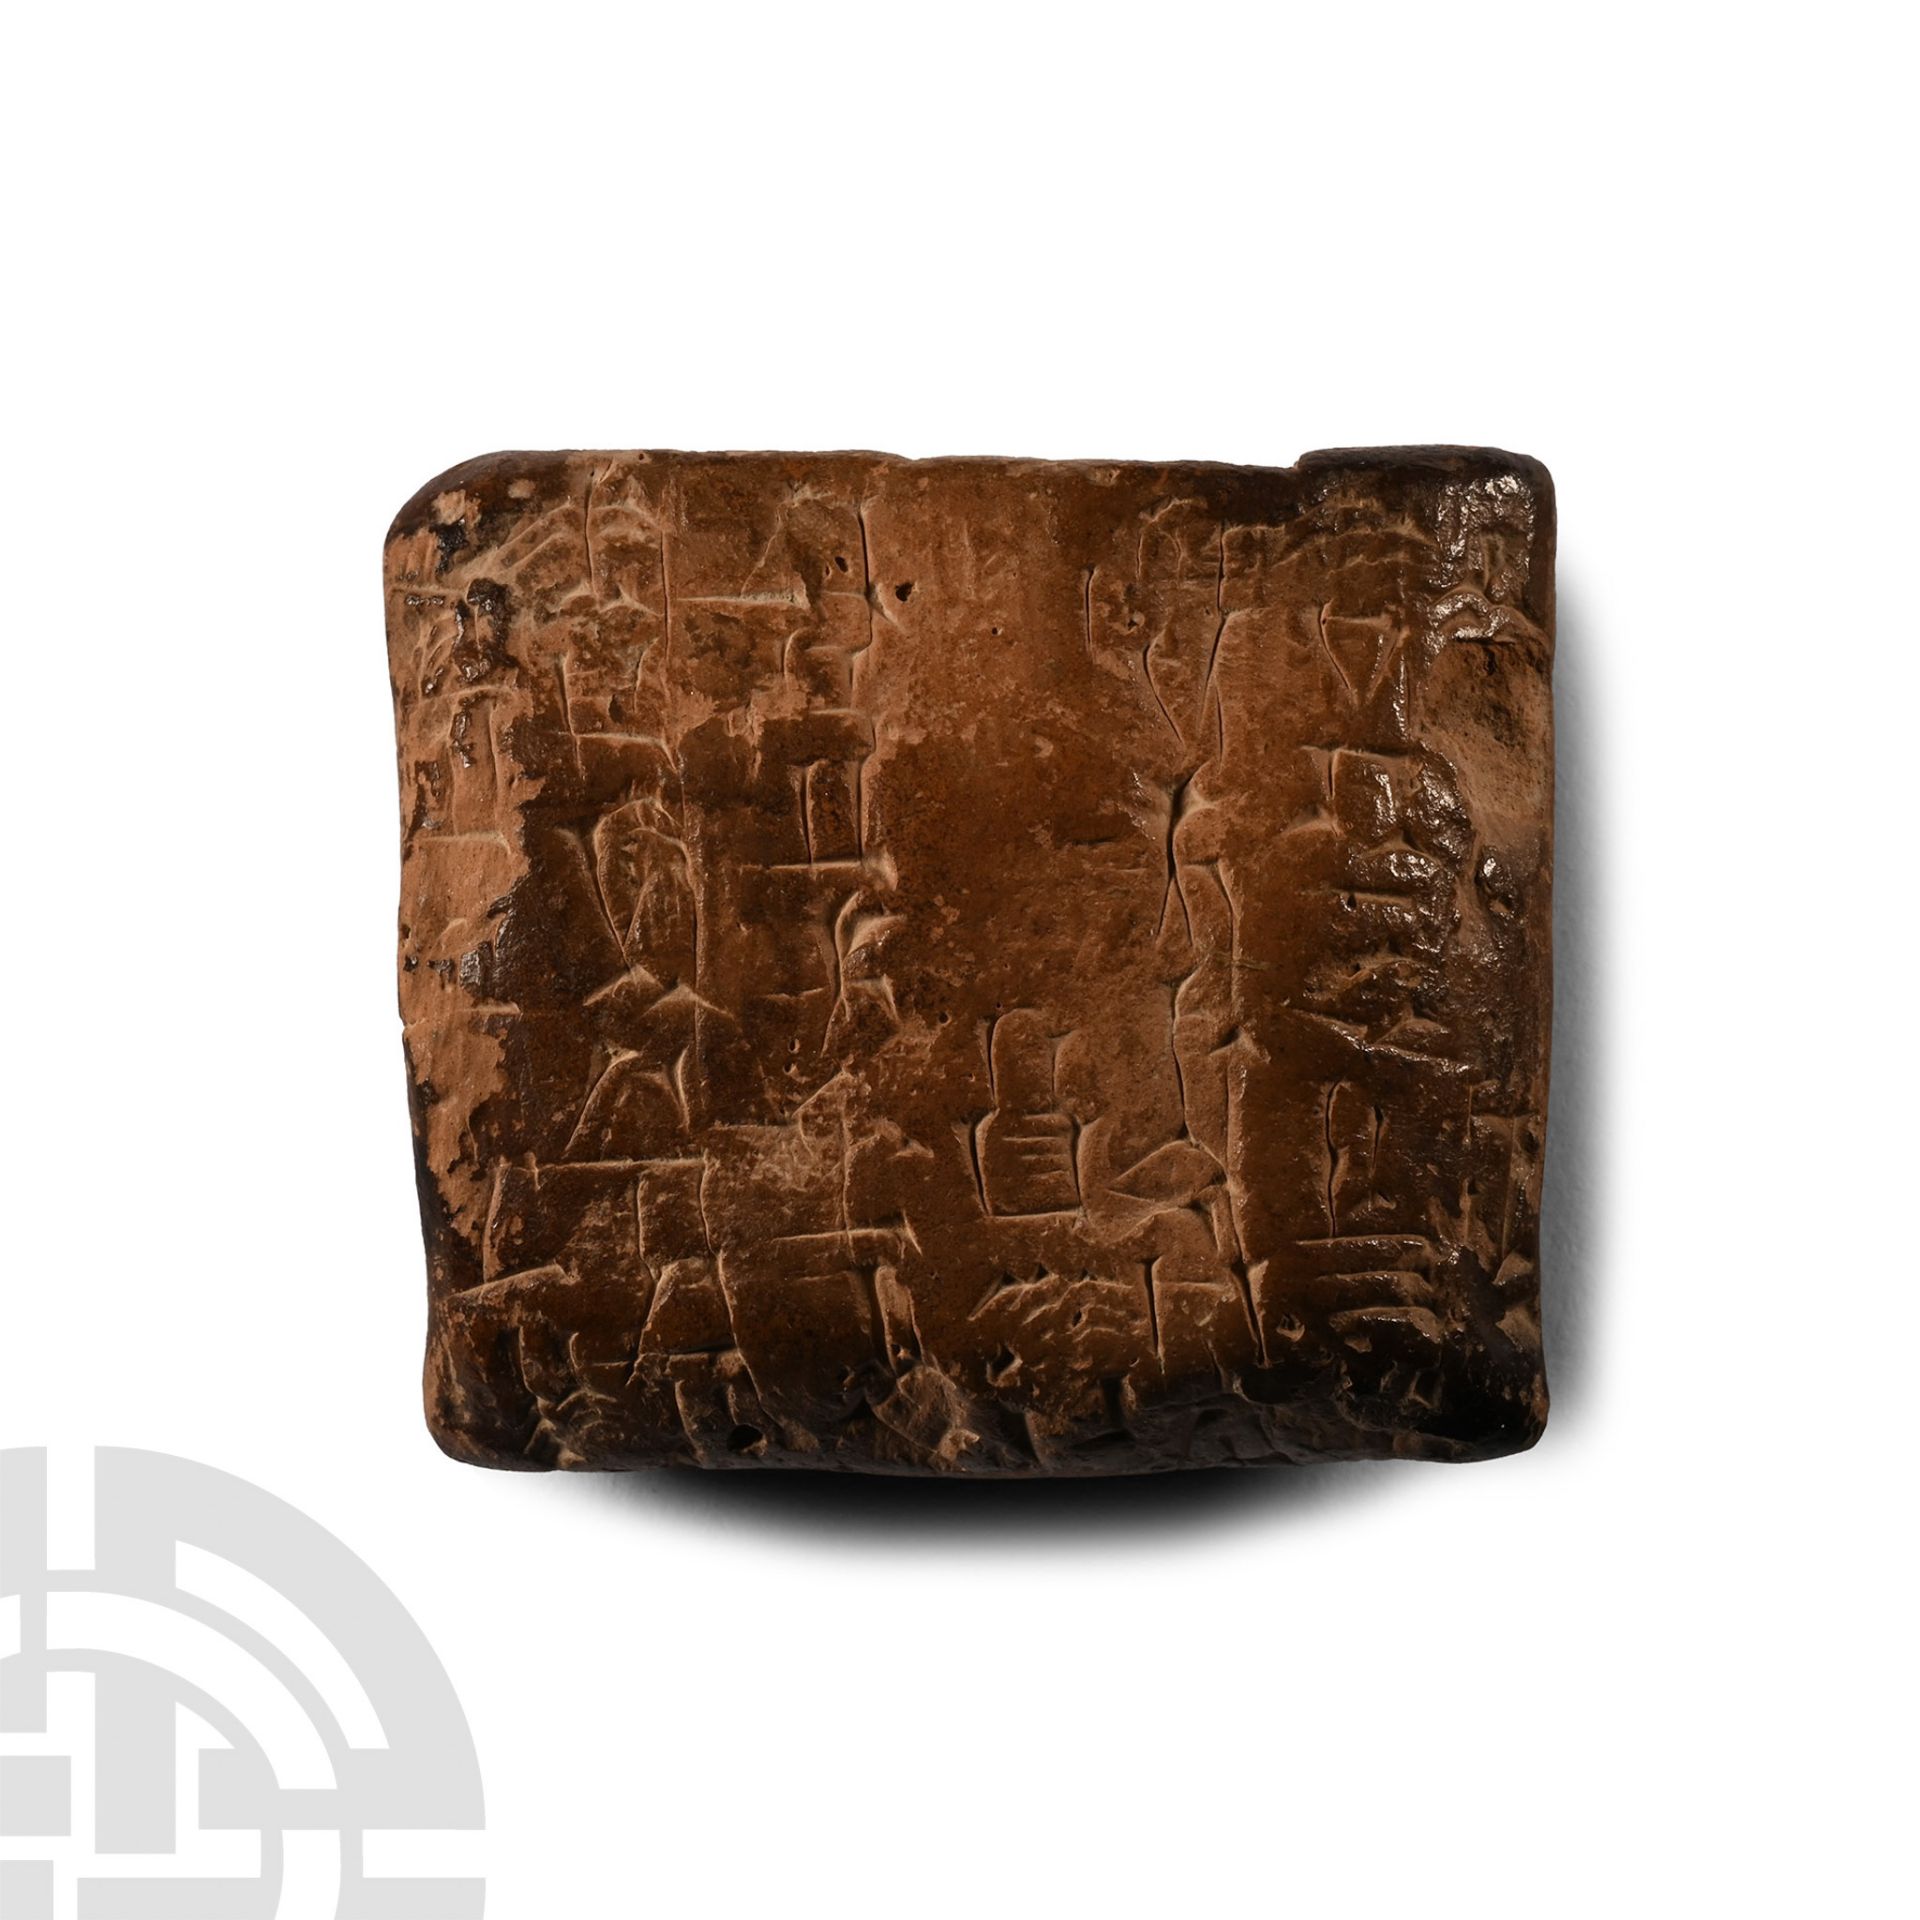 Proto-Sumerian Terracotta Pictographic Tablet - Image 2 of 2